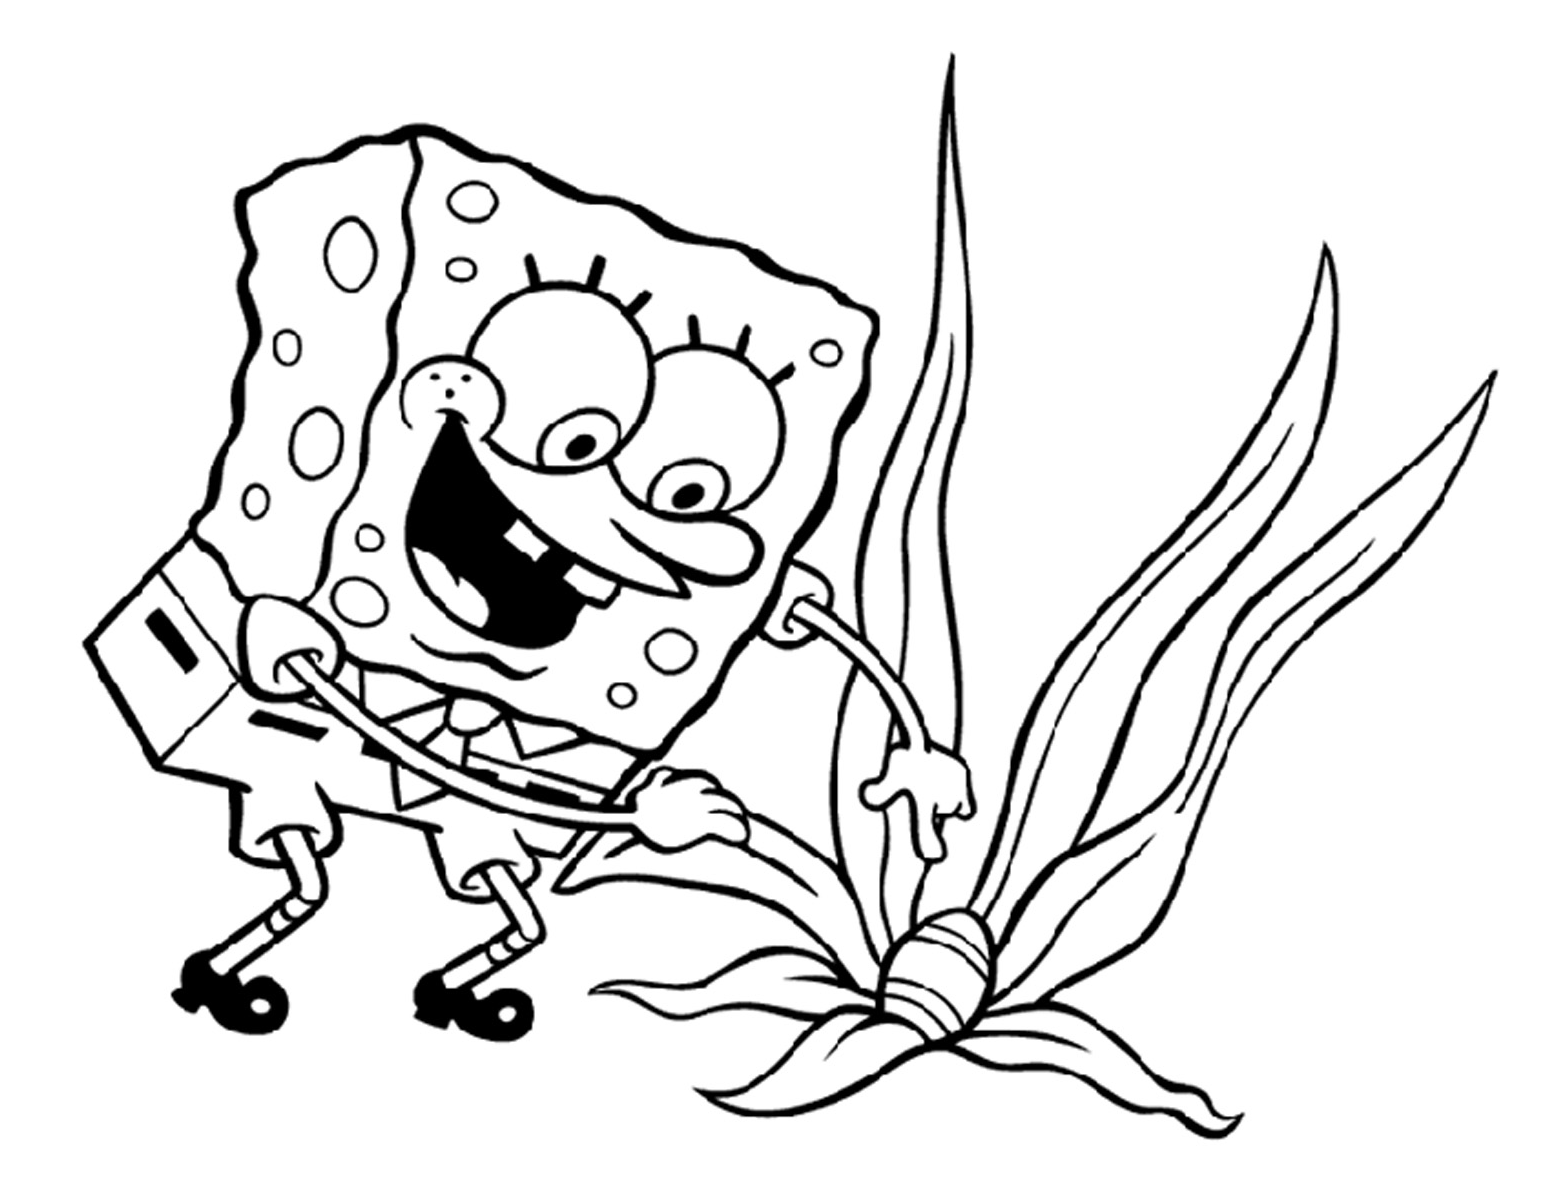 Coloring Pages For Kids Spongebob Hunting Eggs Easter | Easter ...